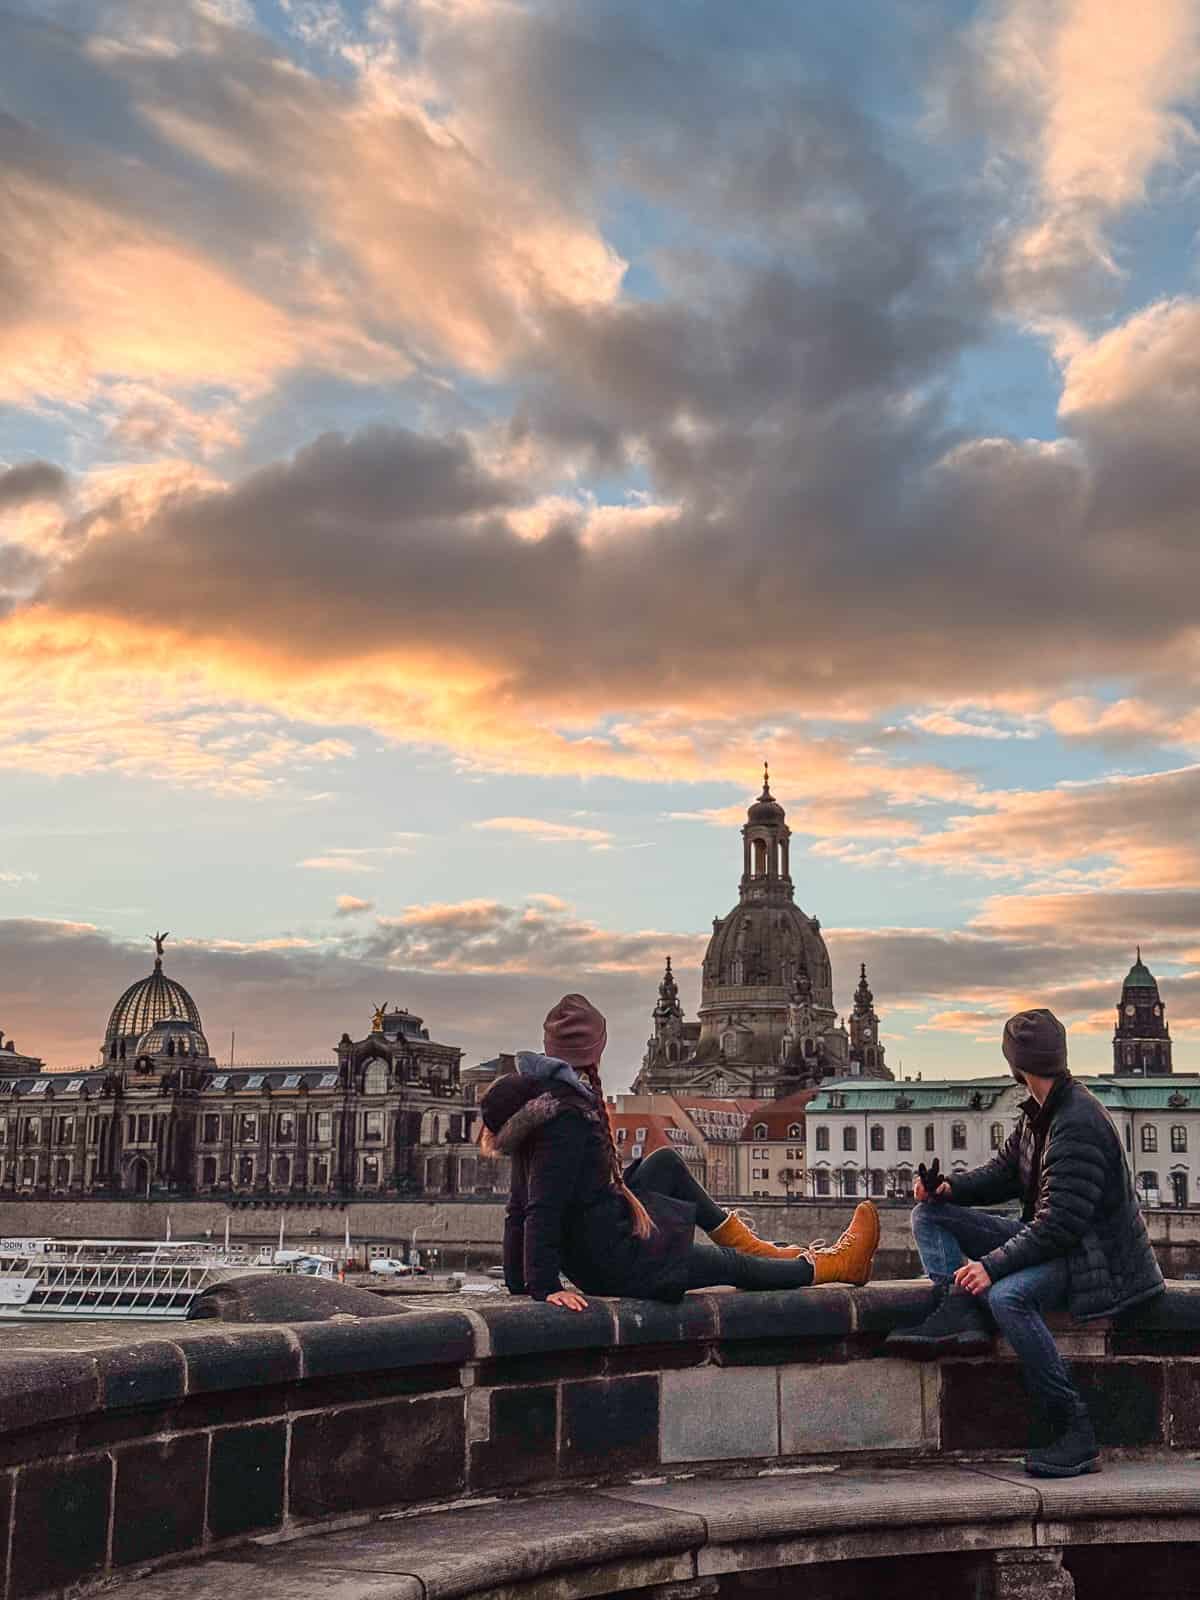 Two people sit on a wall overlooking the Dresden cityscape under a stunning sunset sky, with the iconic Frauenkirche and other baroque architecture in the background.